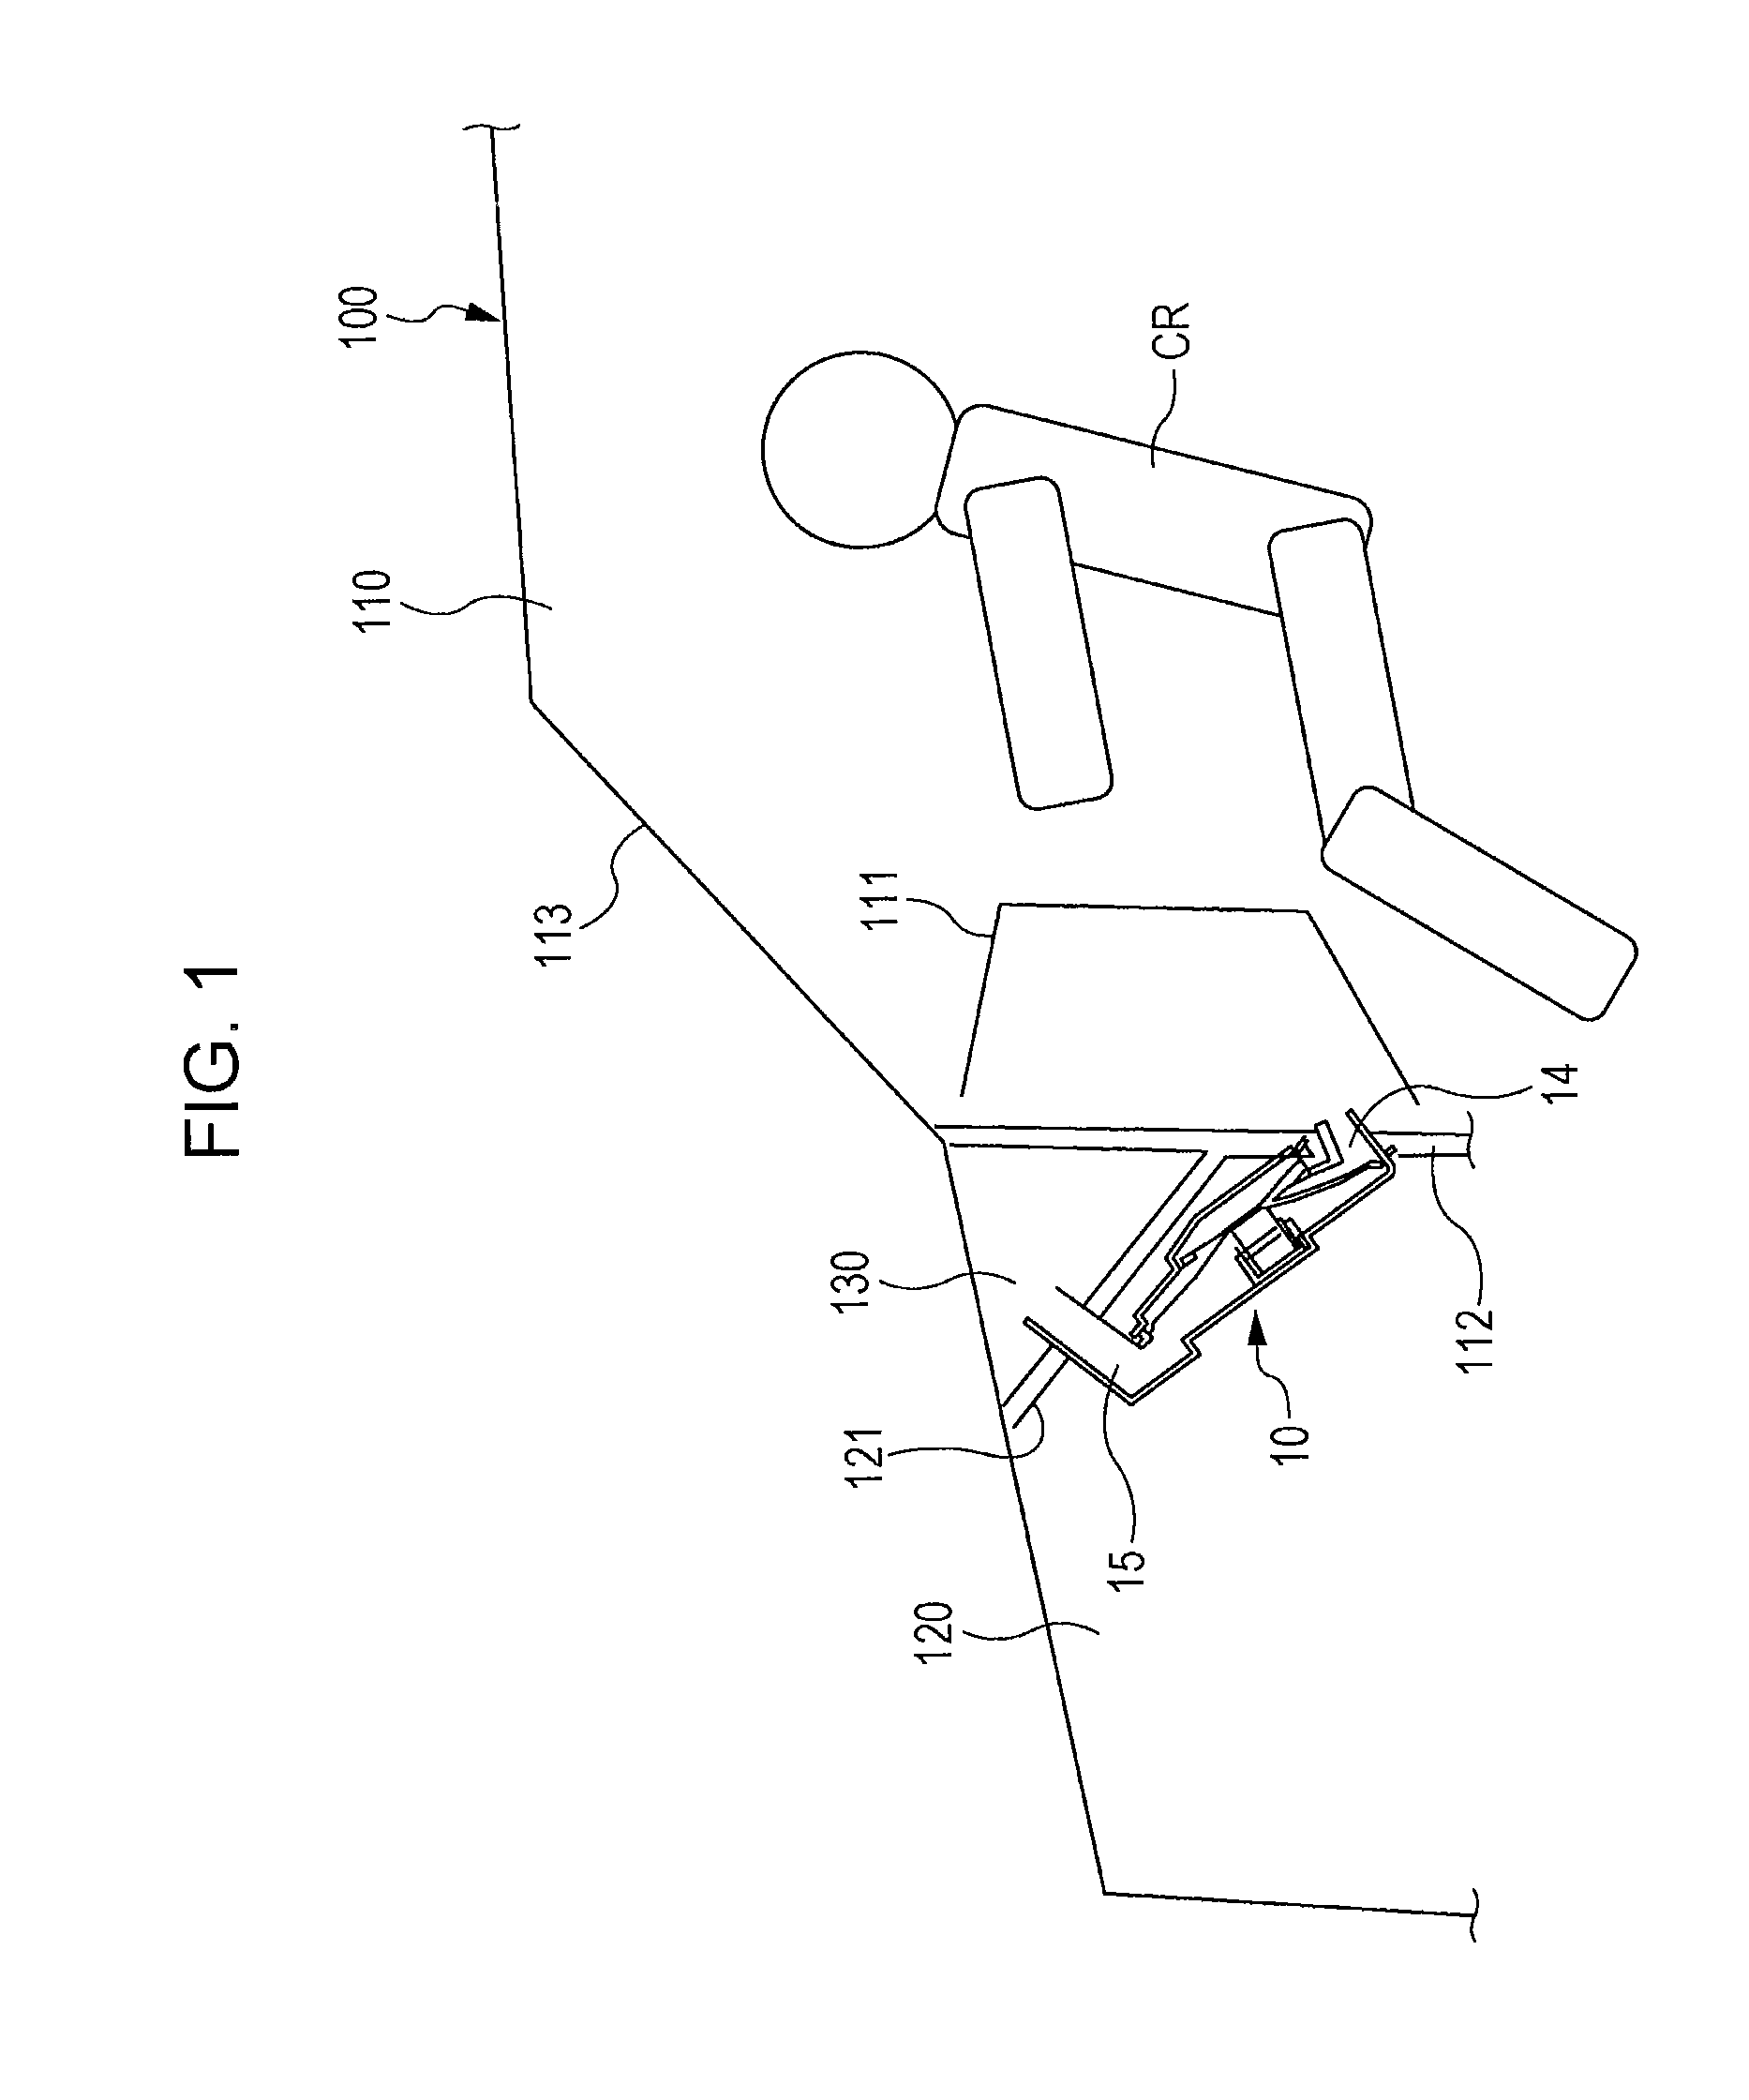 Structure for installing loudspeaker system in vehicle